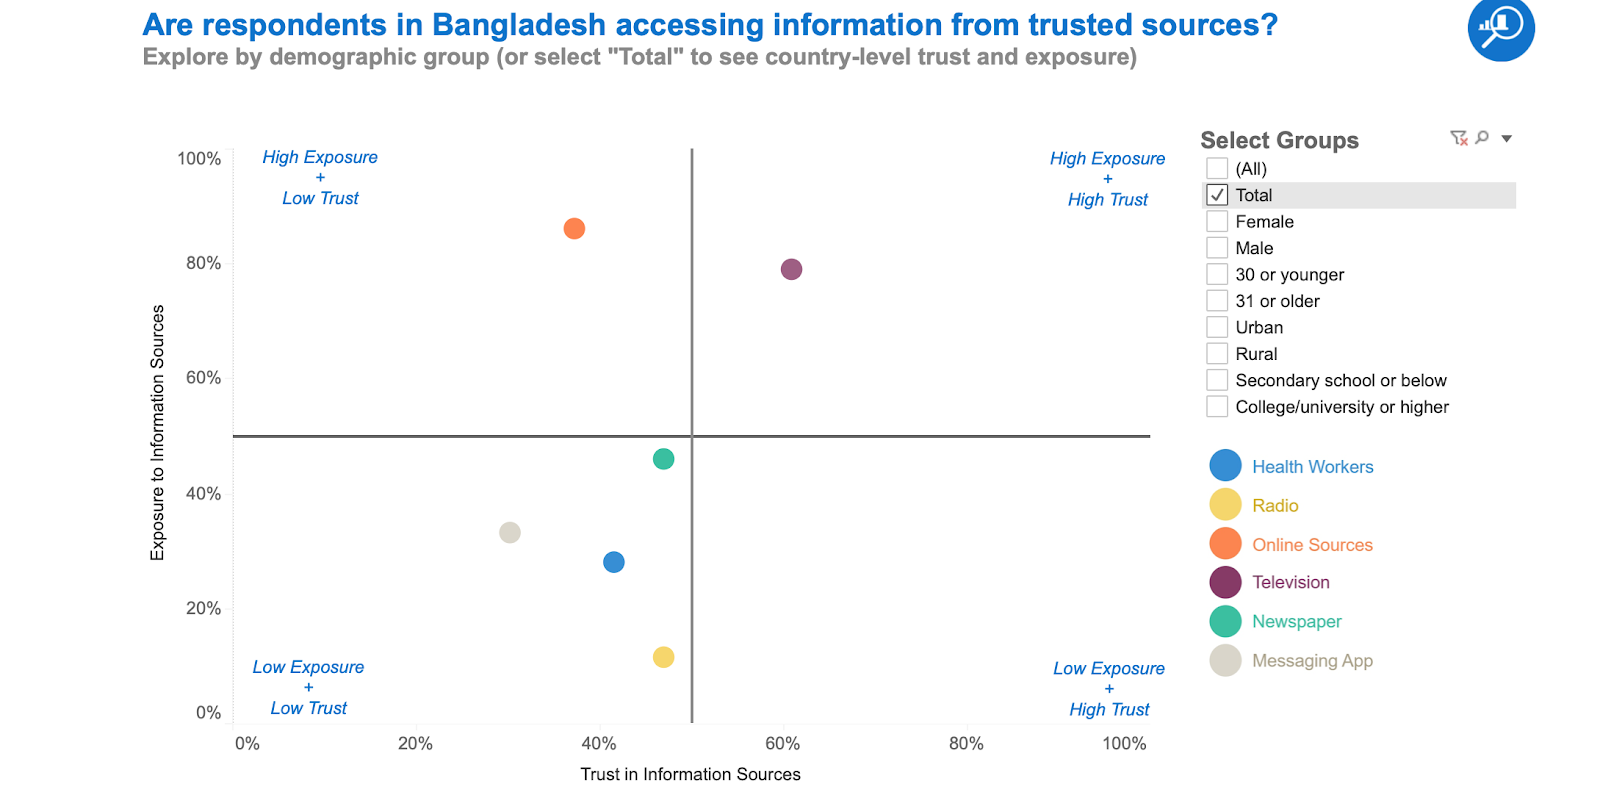 Are respondents in Bangladesh accessing information from trusted sources?